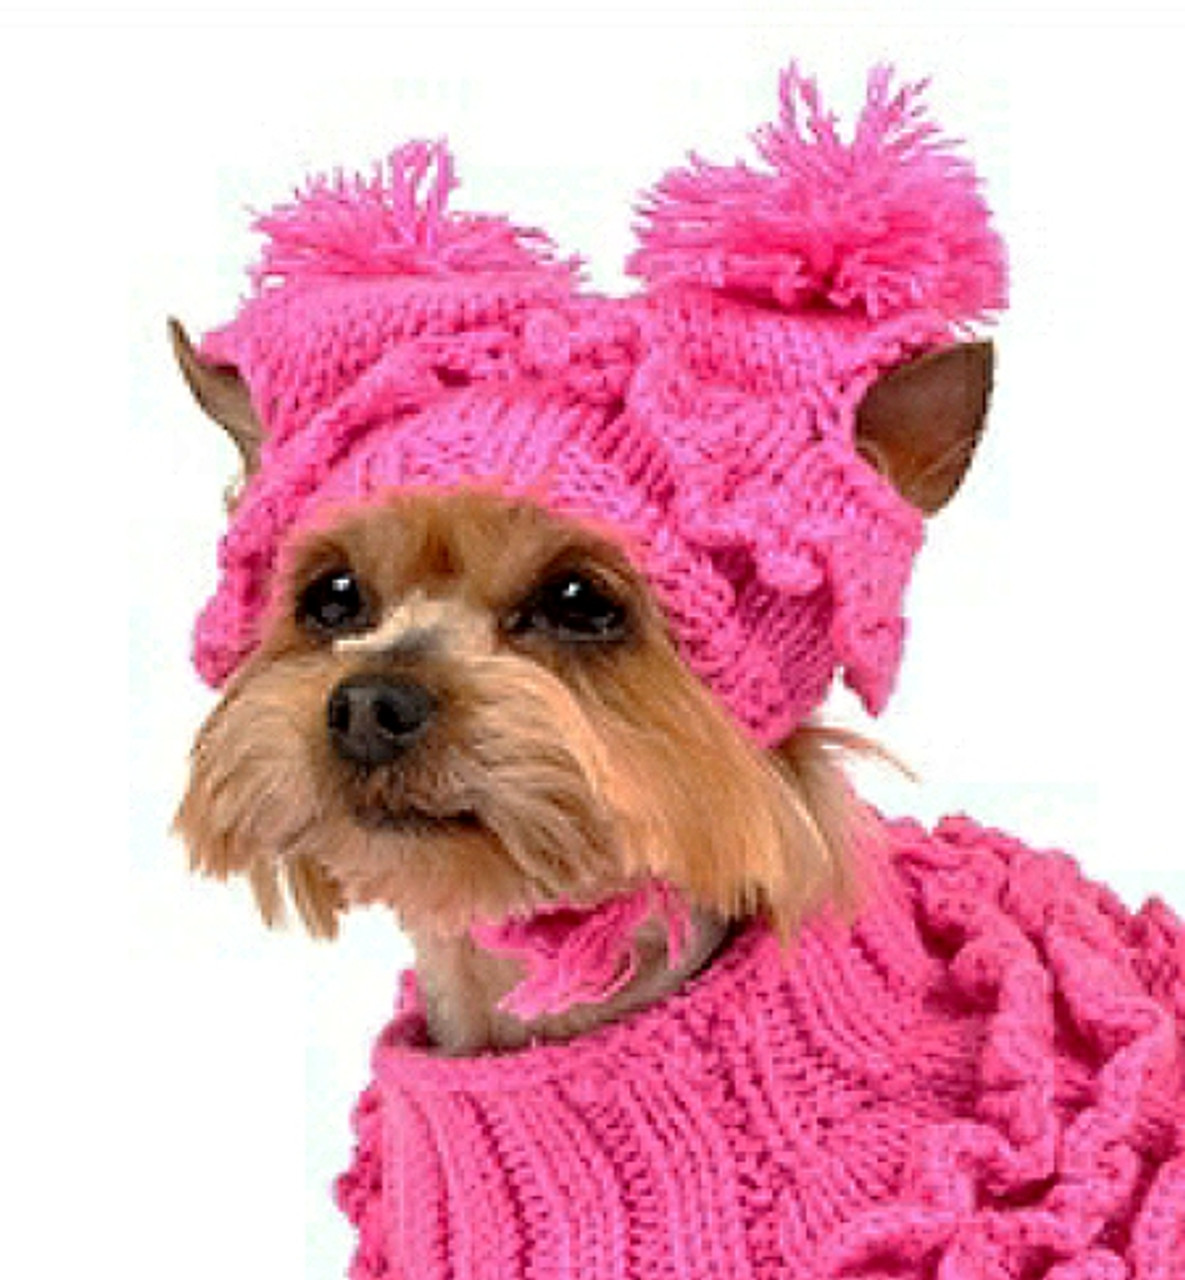 Trending: The knitted dog